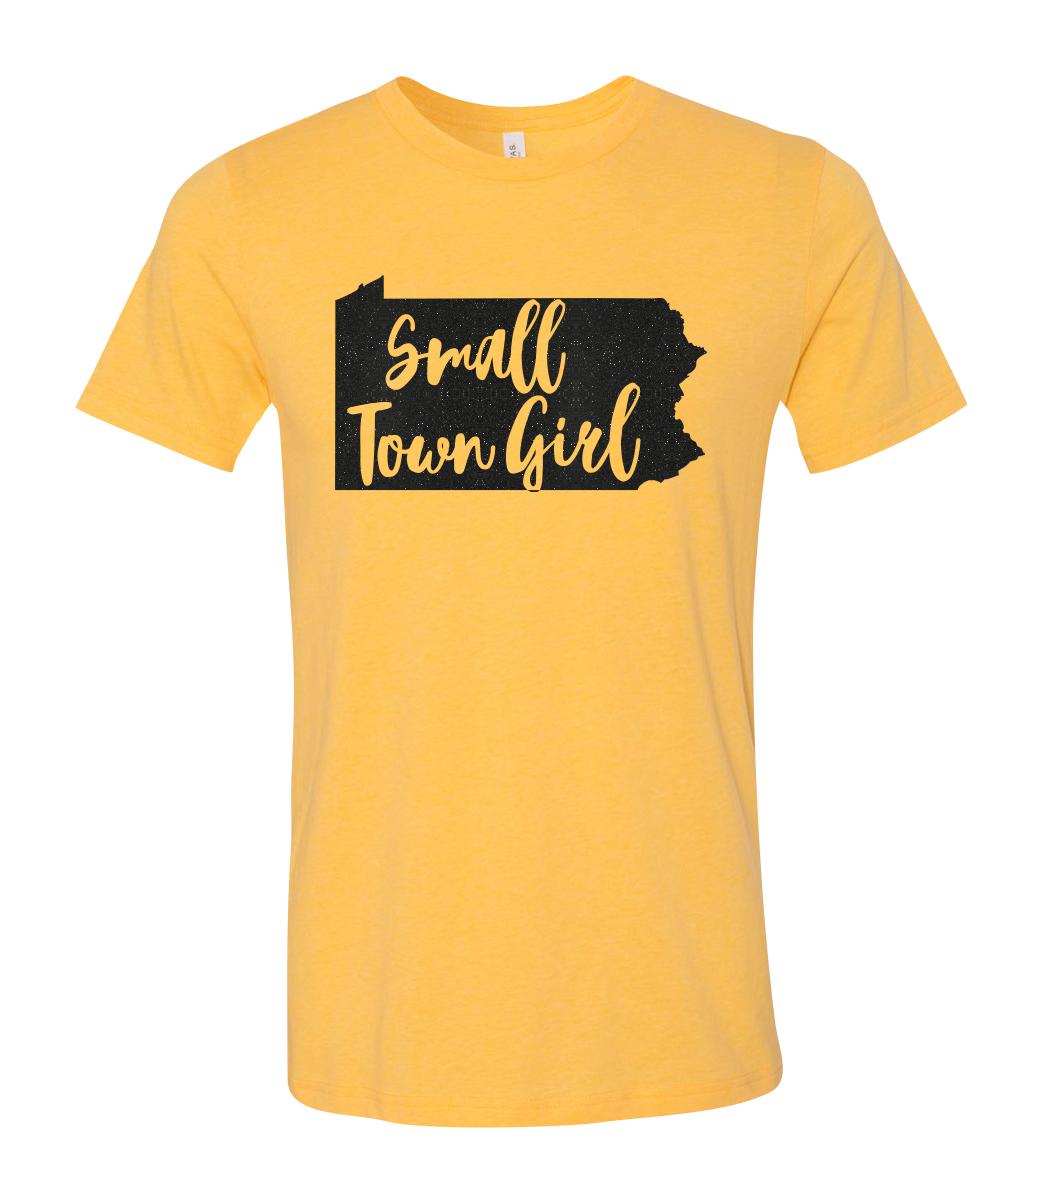 Small Town Girl with State Short Sleeve Graphic T-shirt